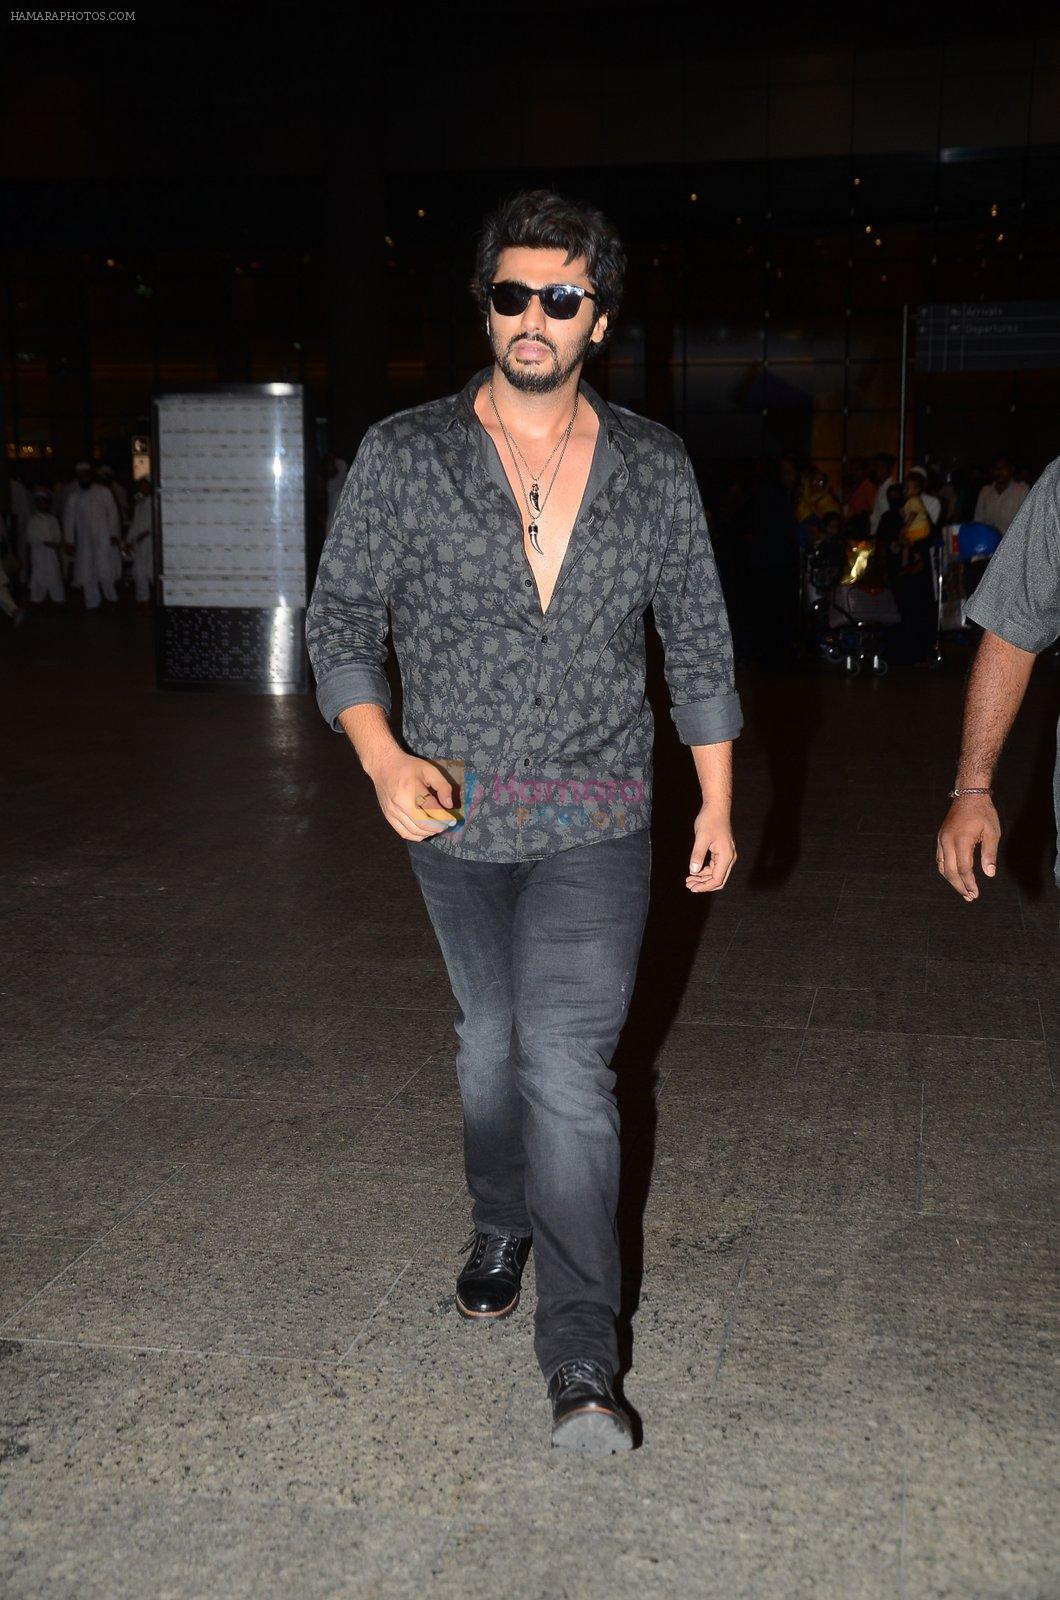 Arjun Kapoor returns from Chandigargh on 18th March 2016